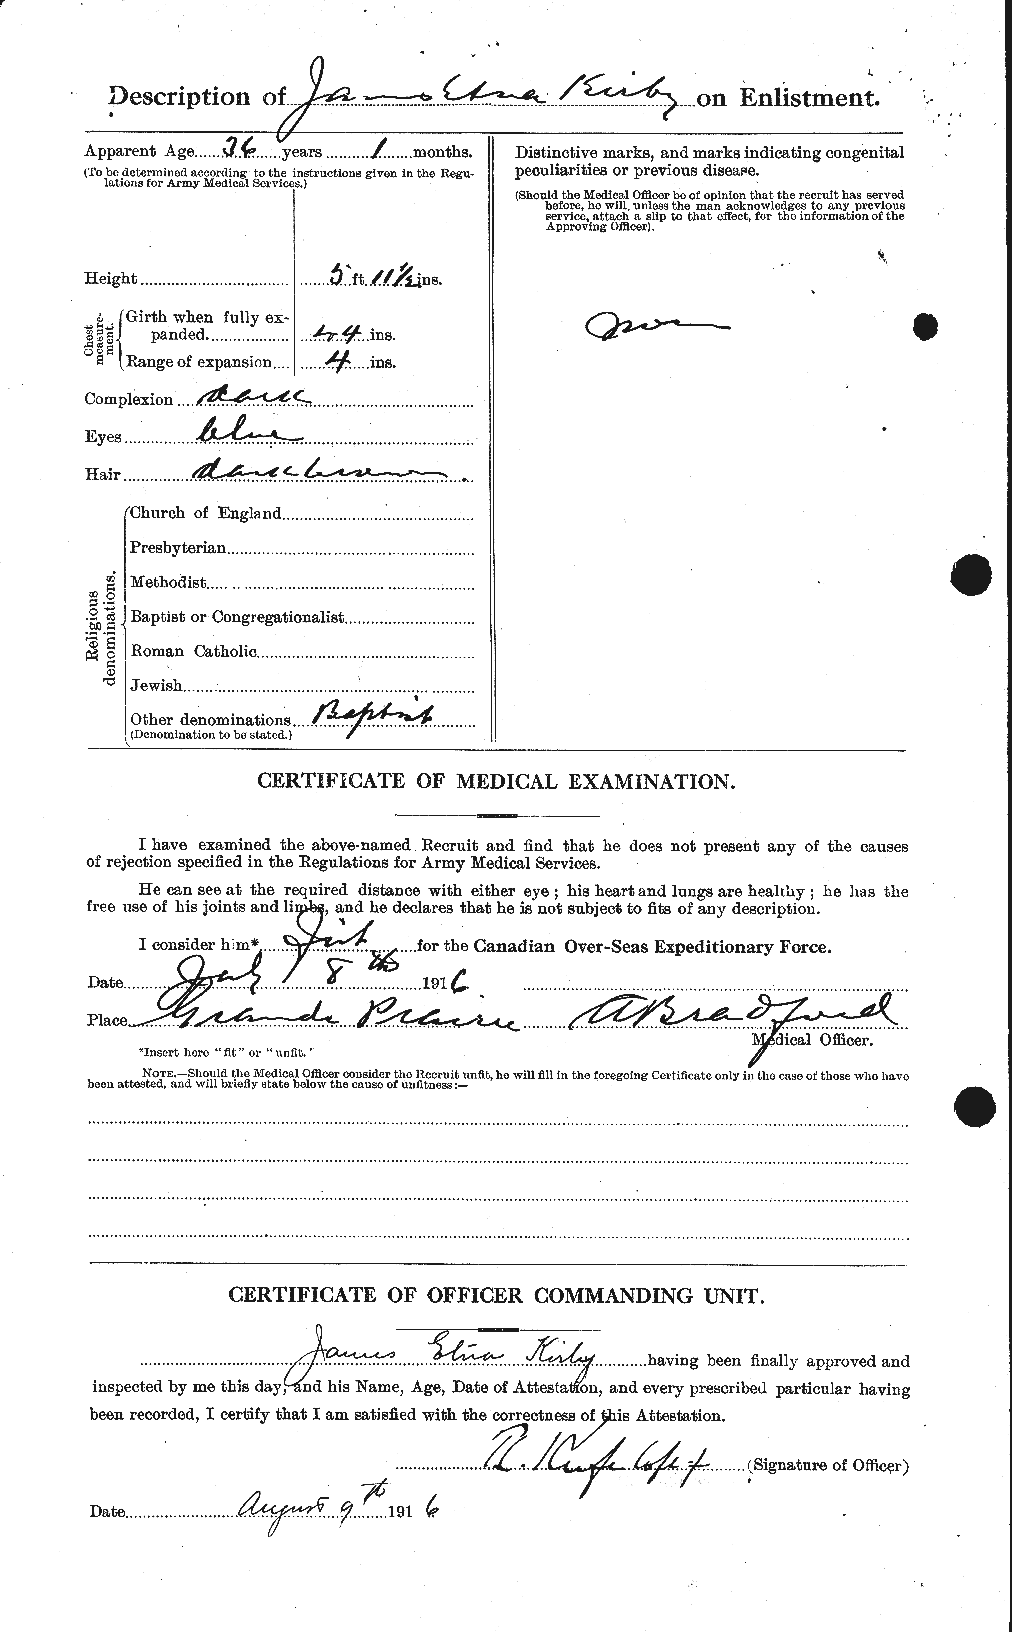 Personnel Records of the First World War - CEF 437219b